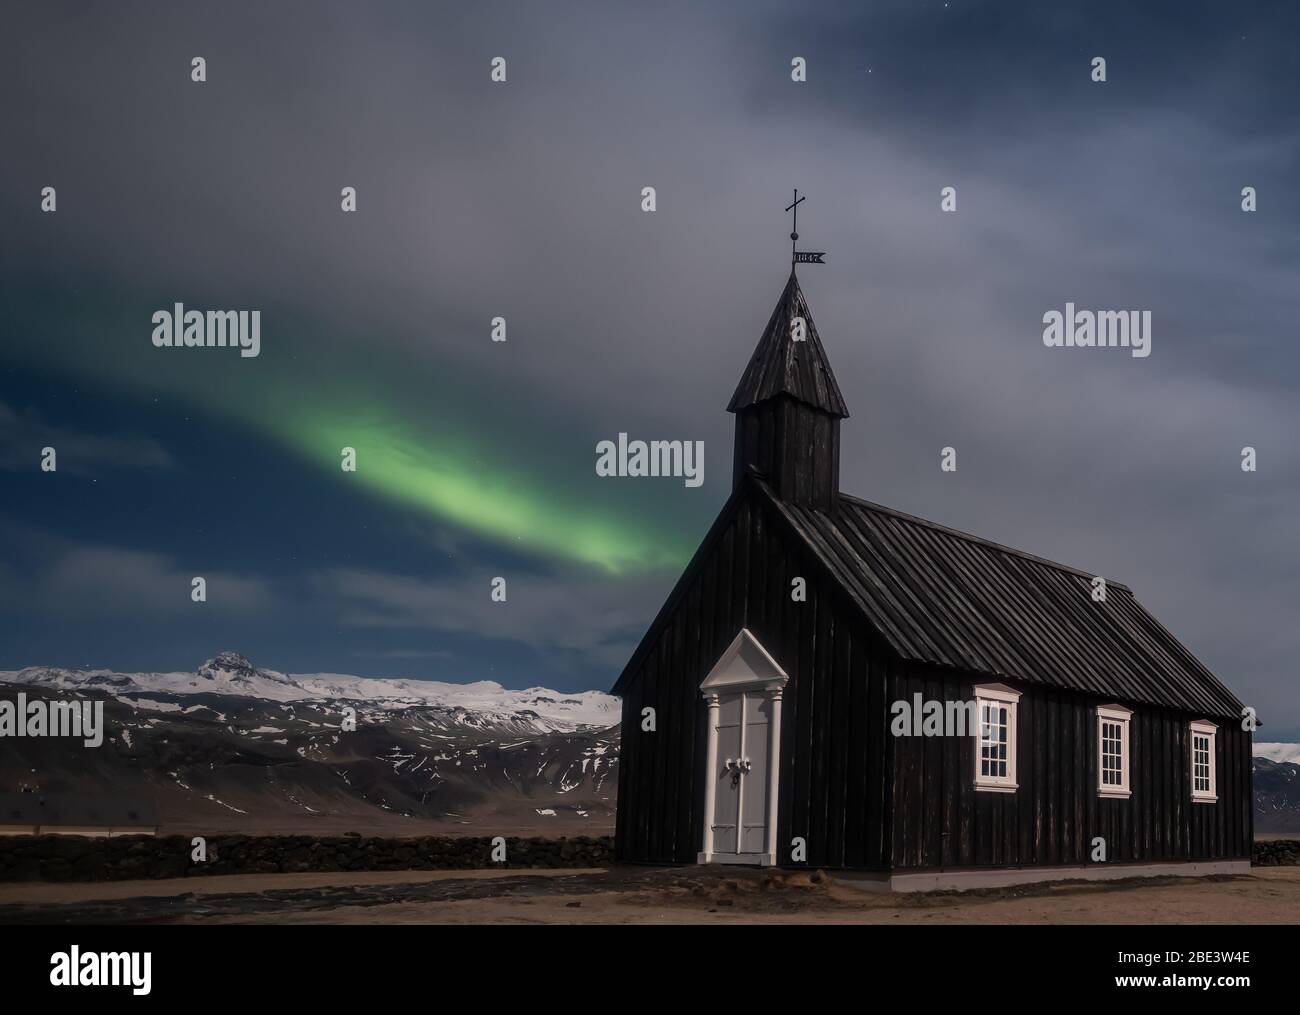 Northern lights aurora borealis over Black church in Iceland Stock Photo